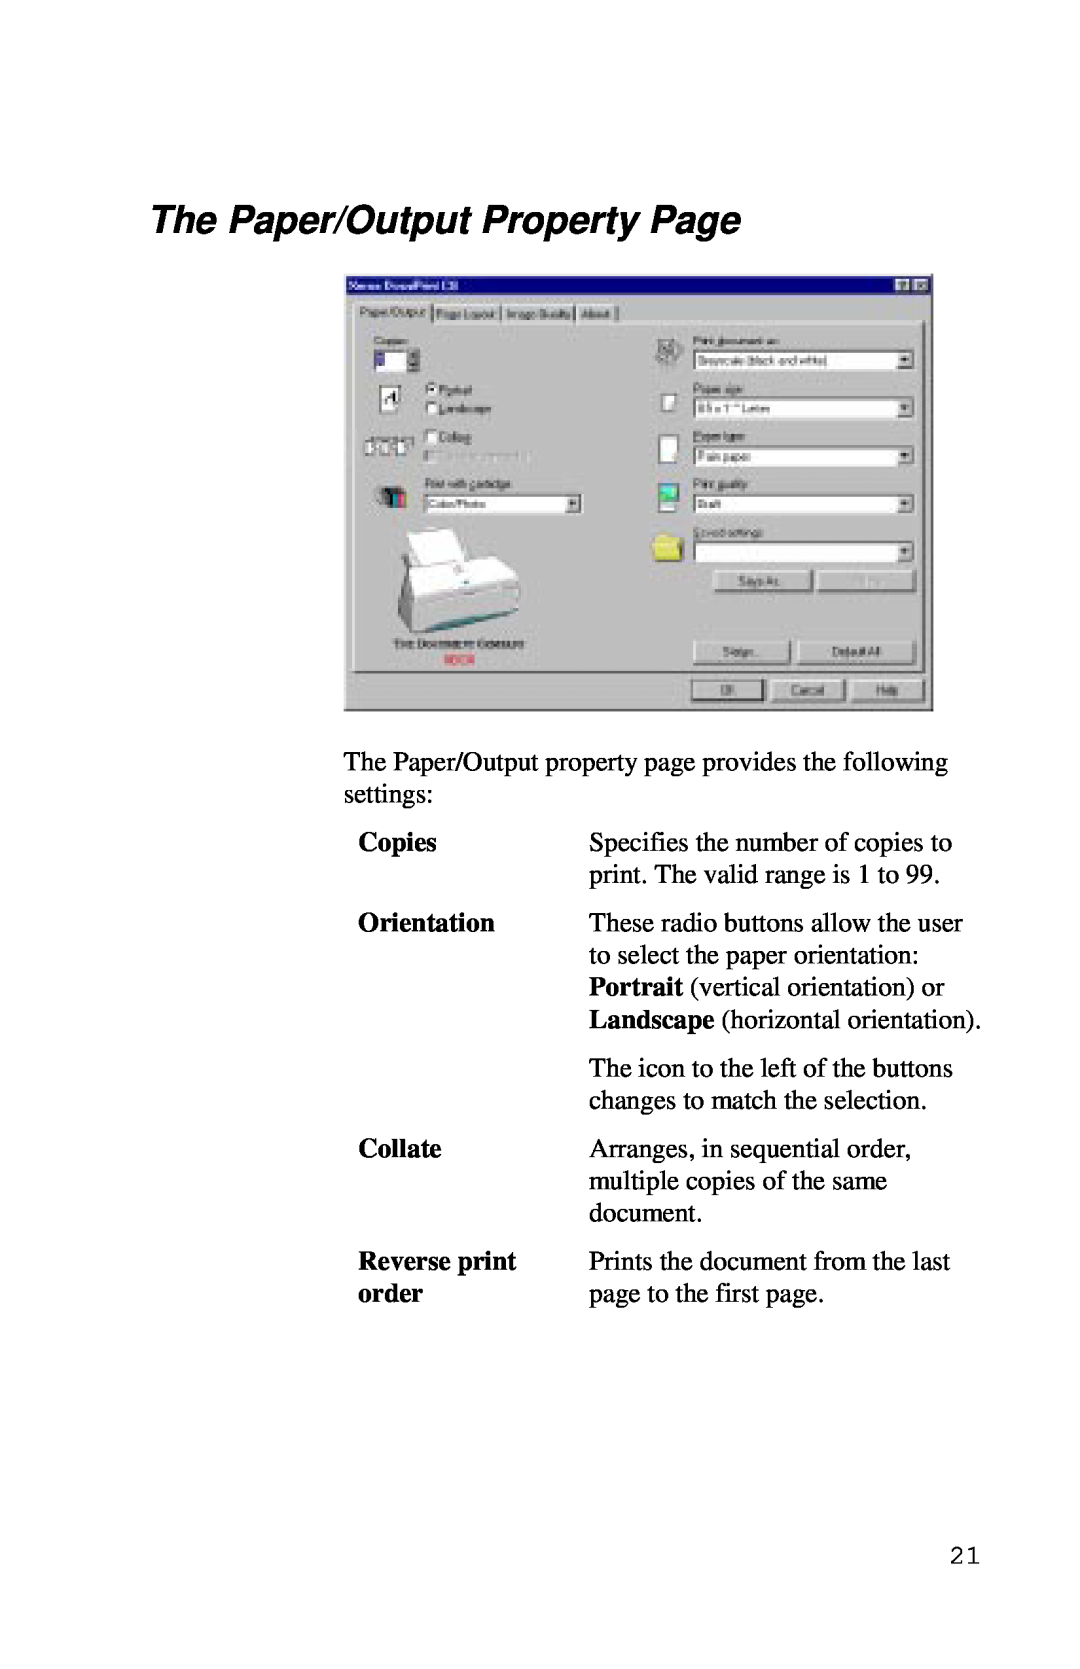 Xerox Inkjet Printer manual The Paper/Output Property Page, Copies, Orientation, Collate, Reverse print, order 